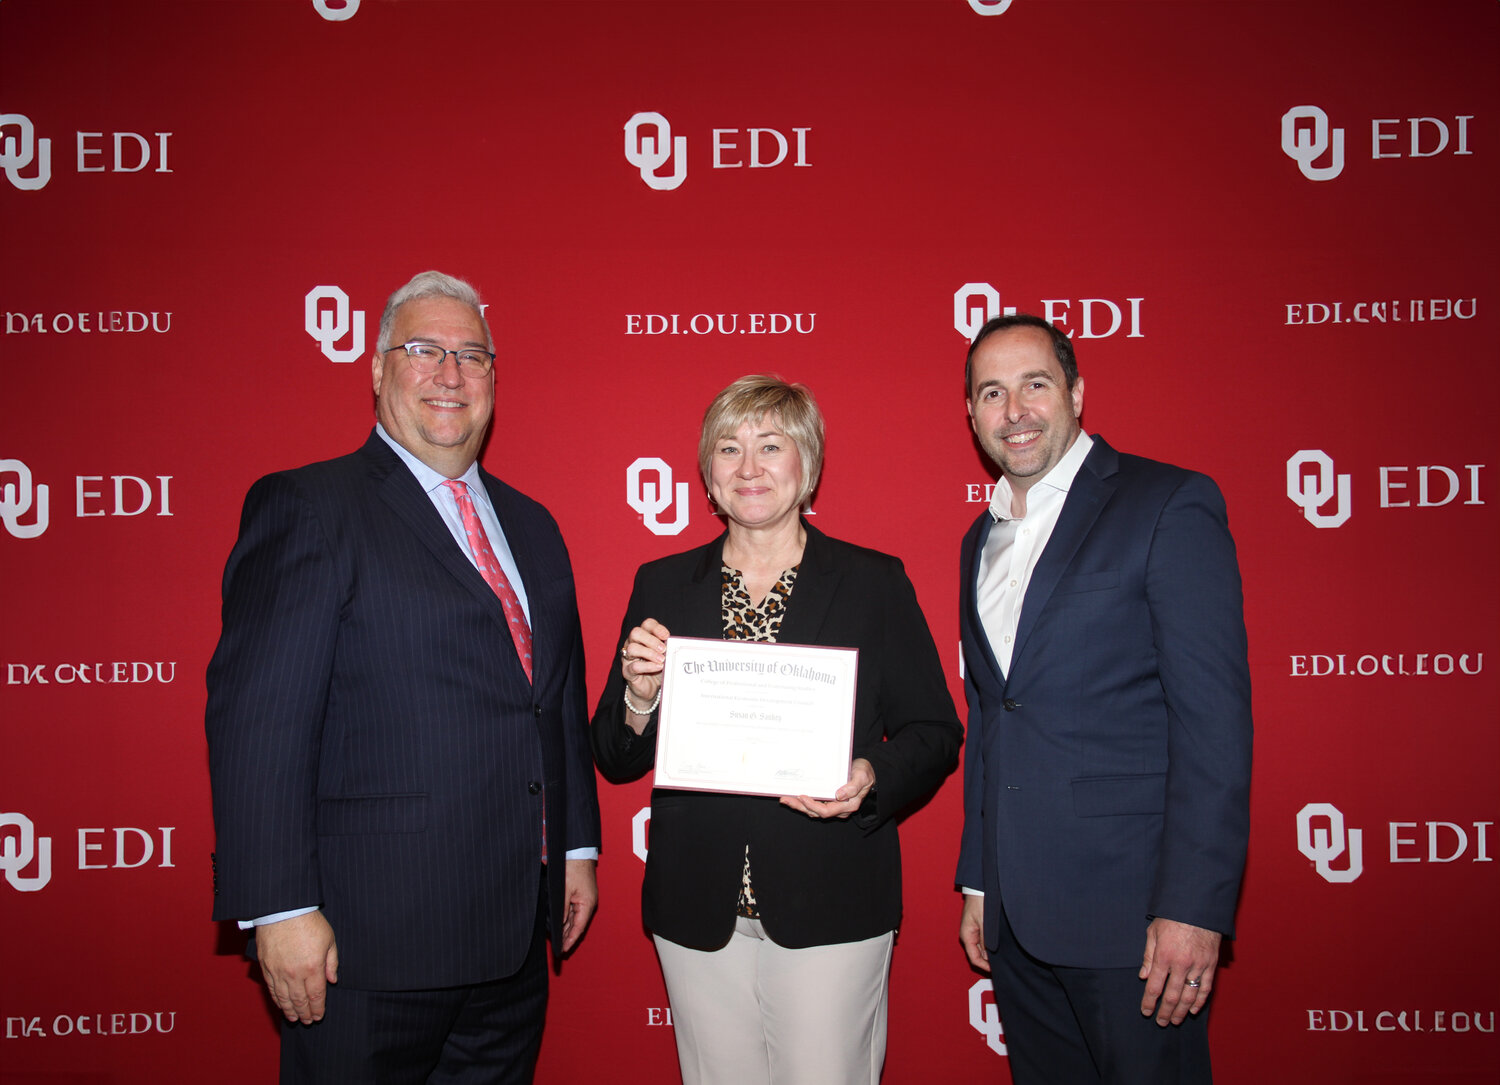 Susan Sankey, center, graduated from the University of Oklahoma Economic Development Institute (OU EDI) at the OU Spring session this year. She is the executive director of the Gonzales Economic Development Corporation.